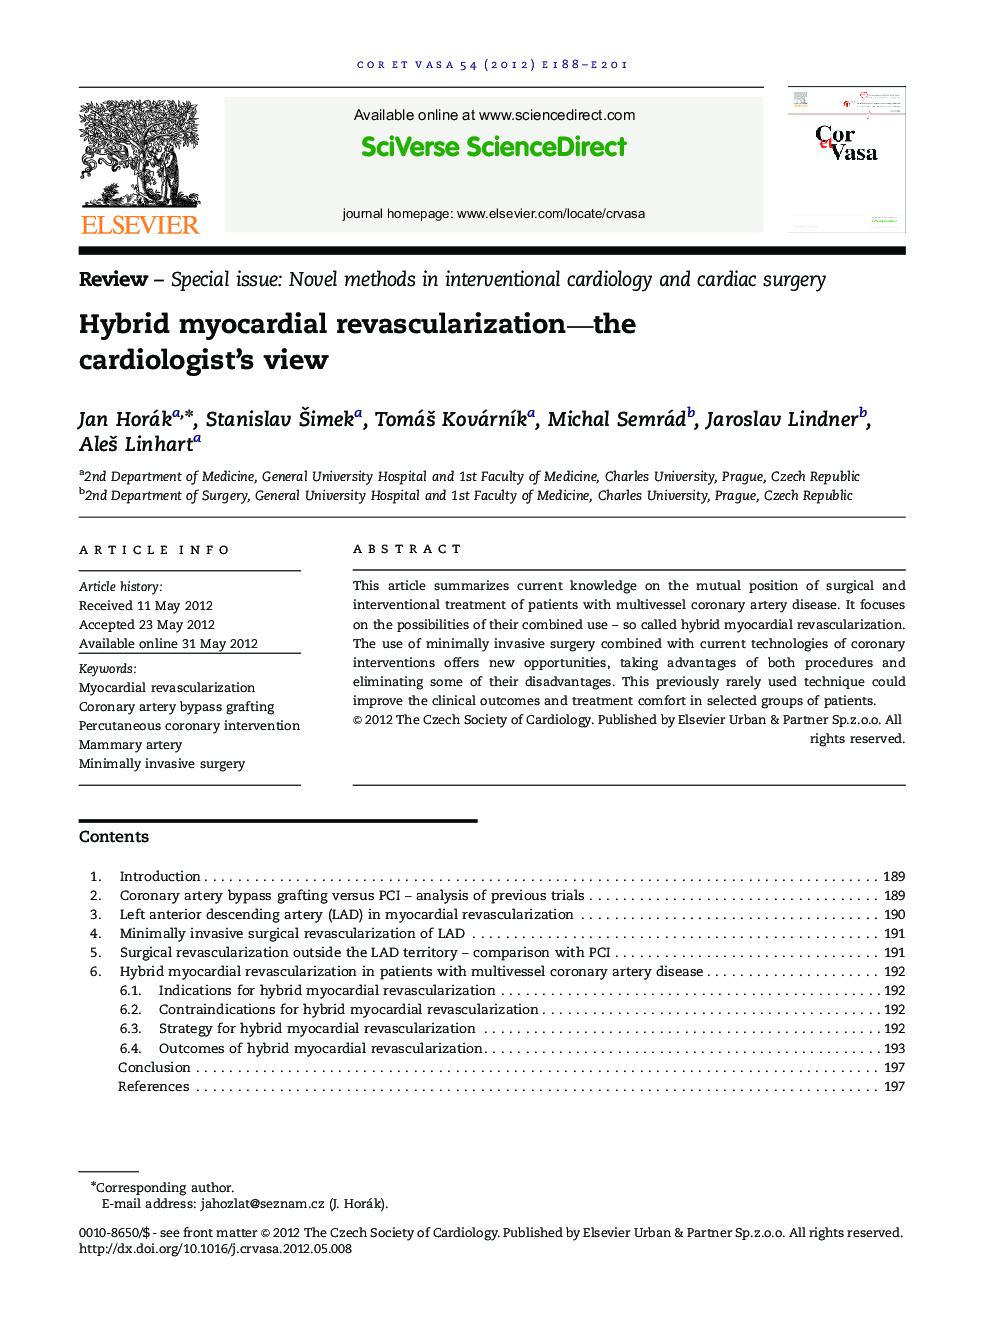 Hybrid myocardial revascularization—the cardiologist's view